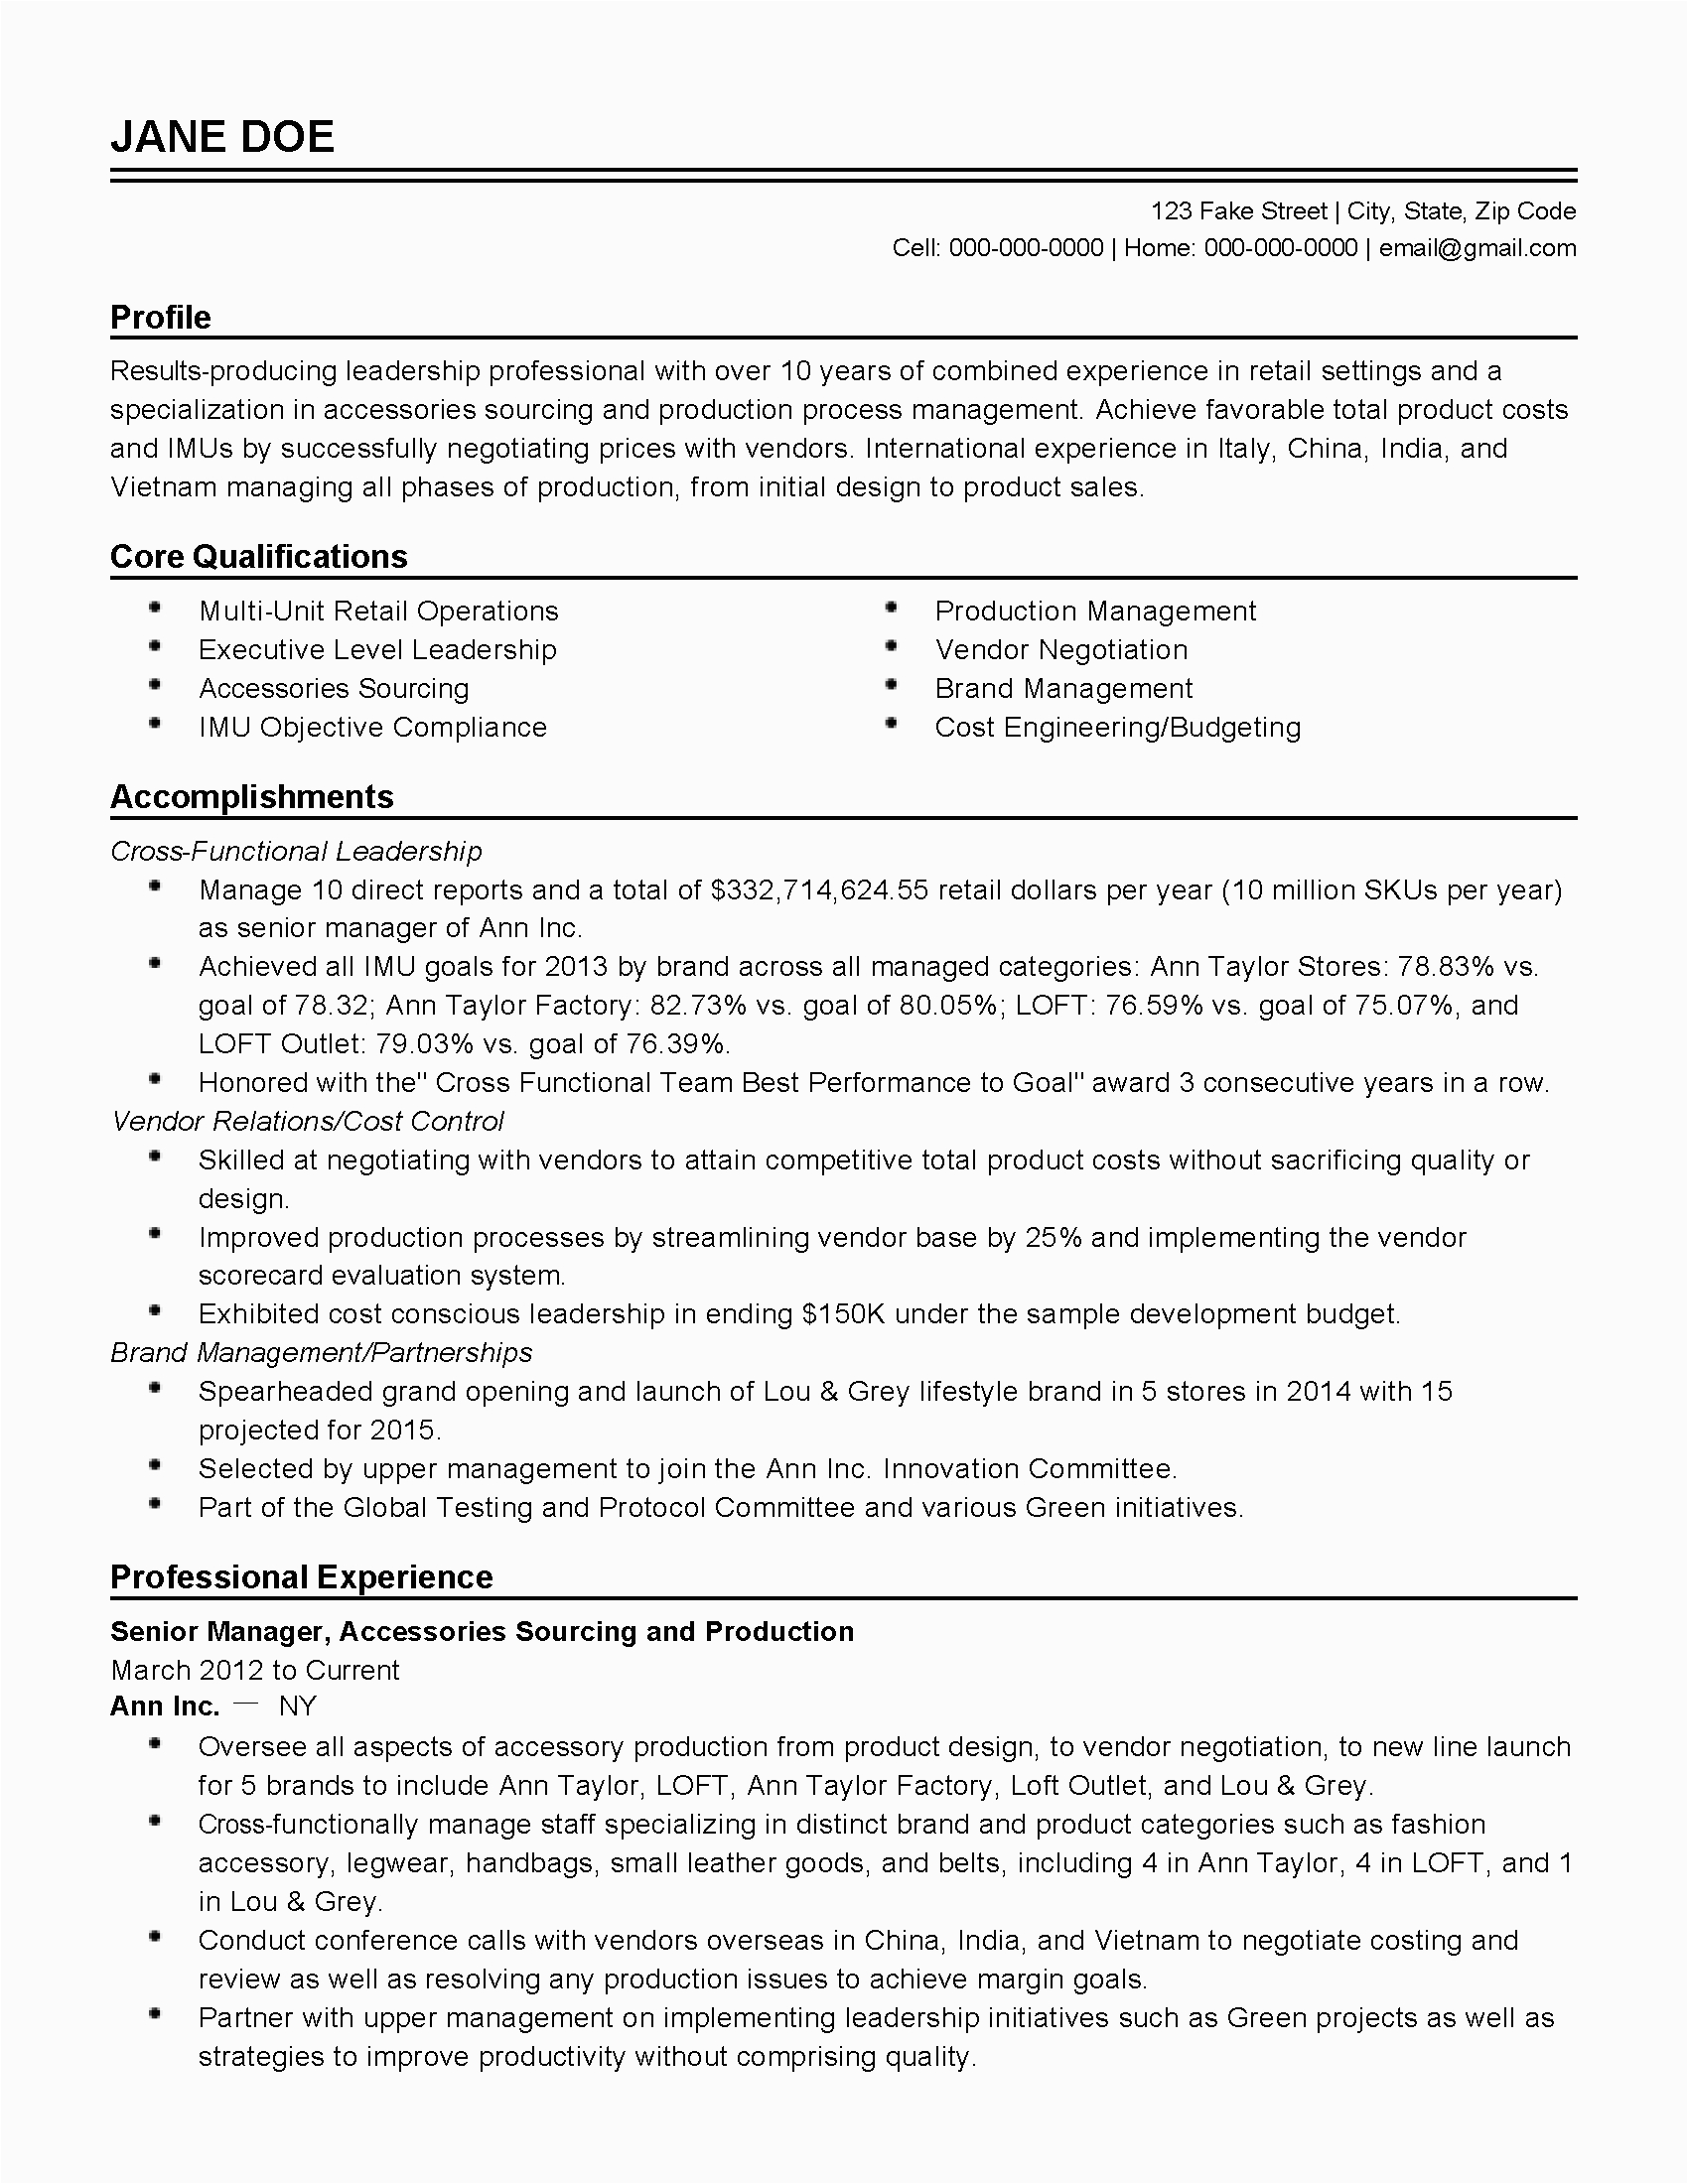 Resume Template for 10 Years Experience 10 Years Experience software Engineer Resume Briefkopf